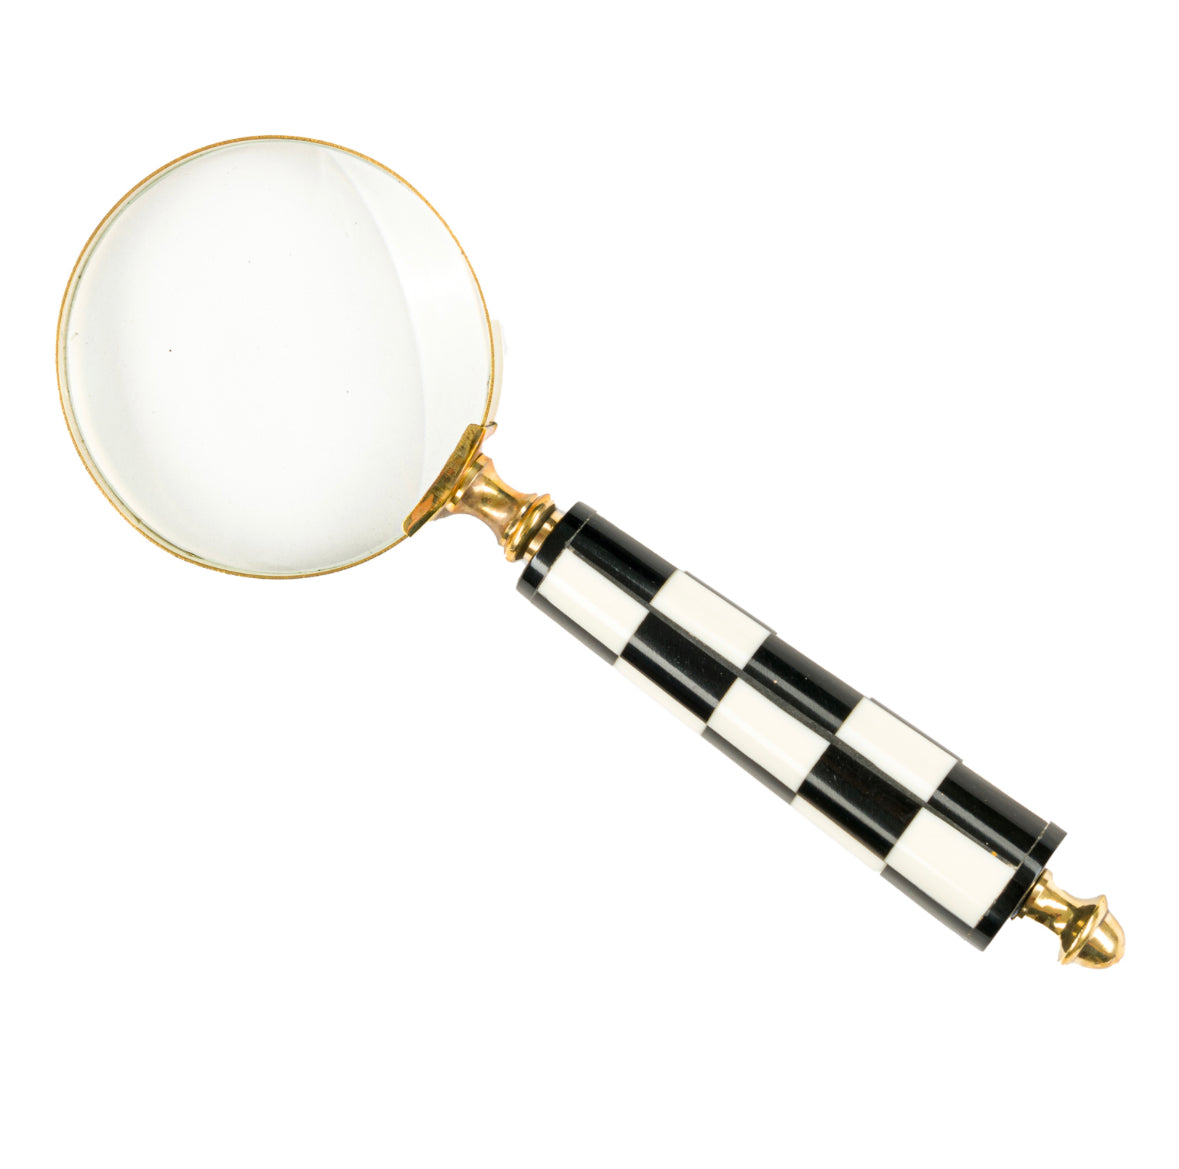 Checkered Magnifying Glass